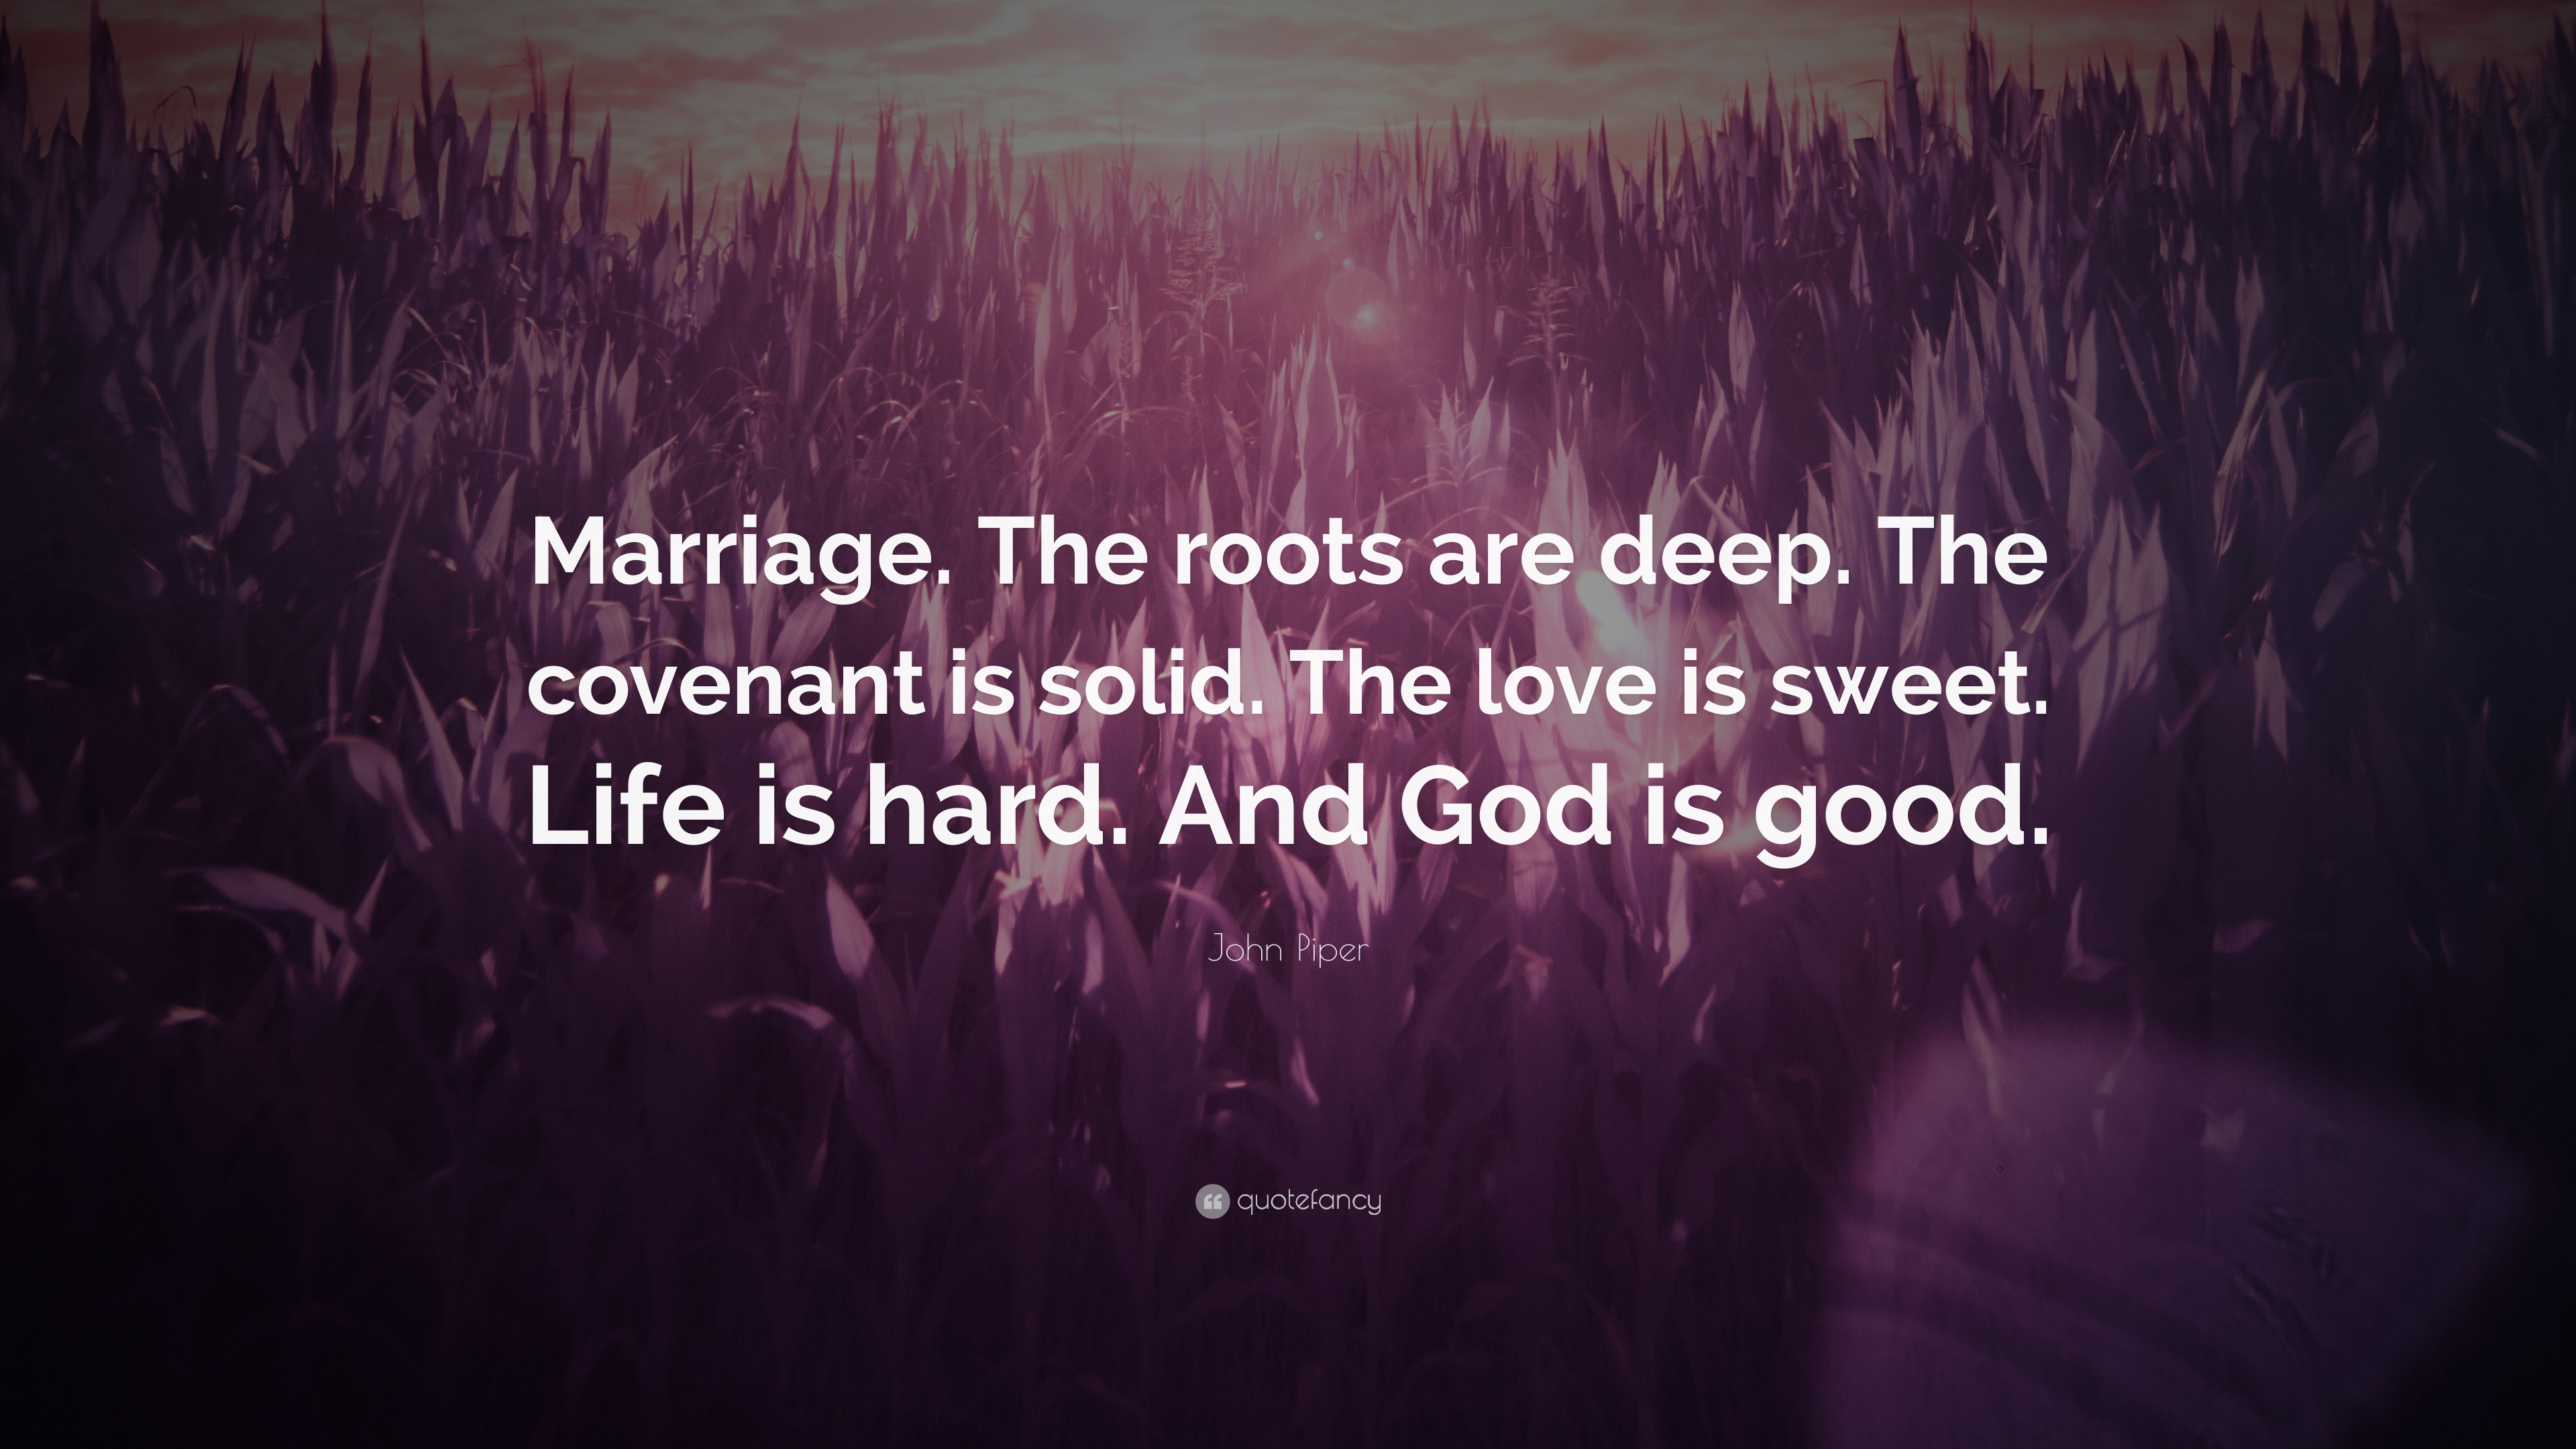 1786431 John Piper Quote Marriage The roots are deep The covenant is solid